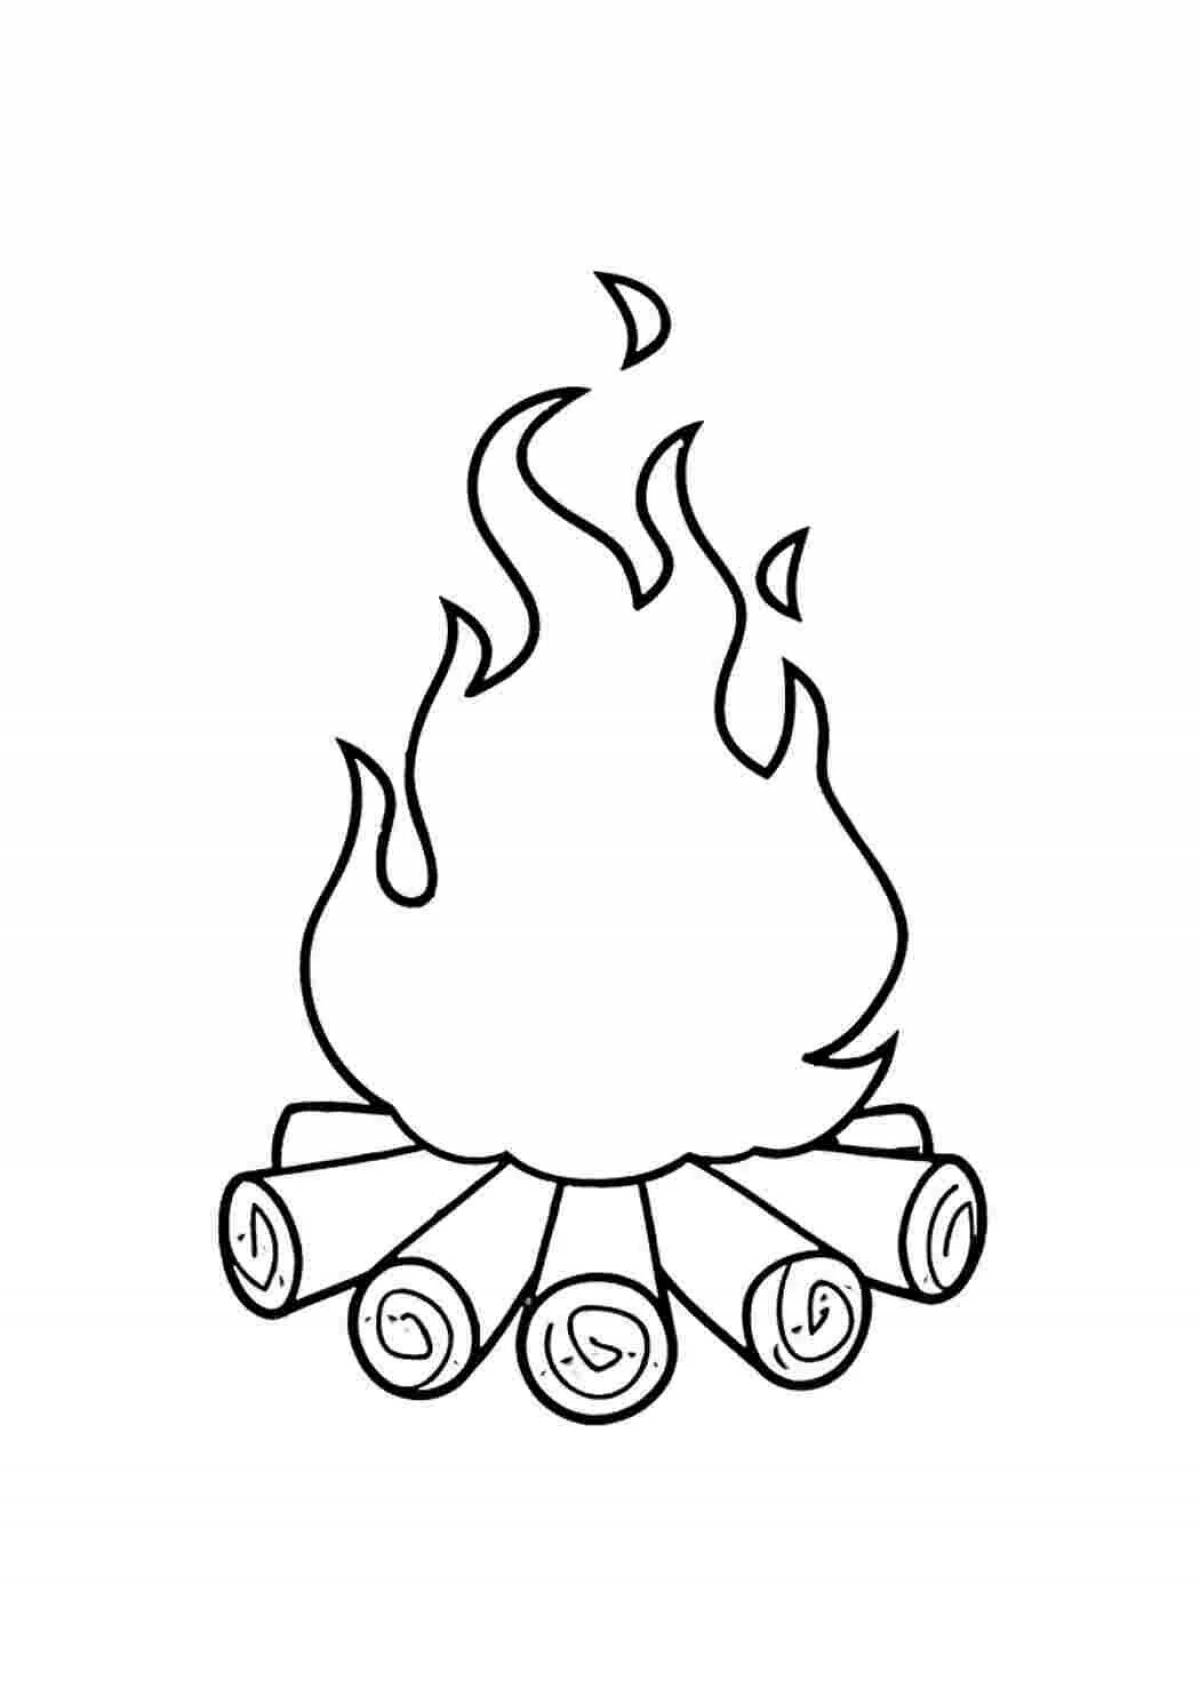 Shining Campfire Coloring Page for Toddlers